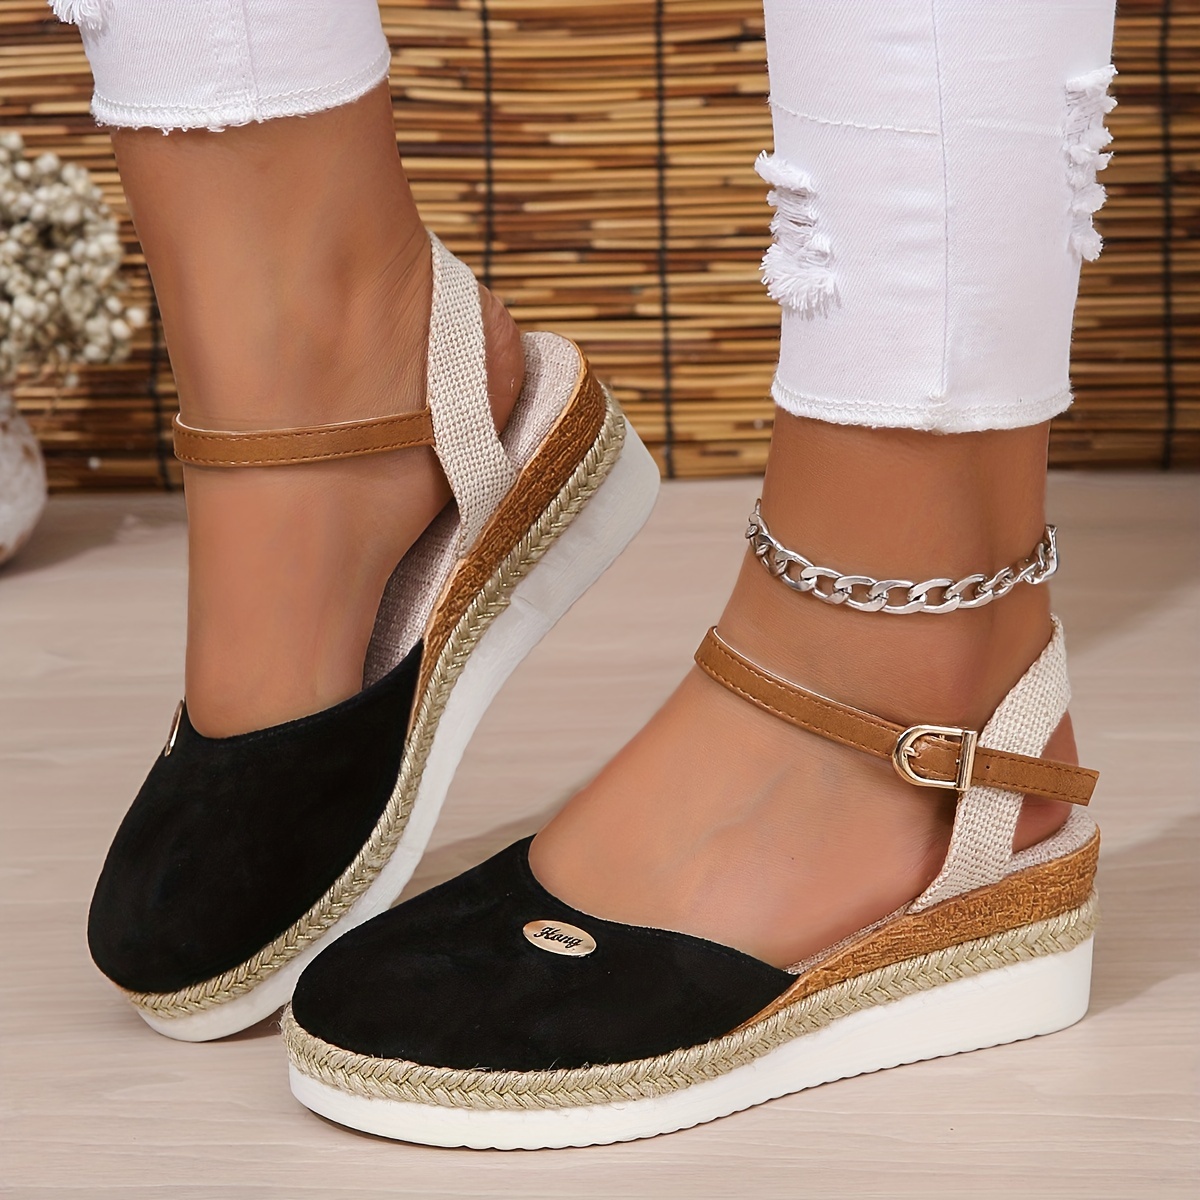  Closed Toe Espadrilles for Women,Orthopedic Wedge Sandals  Vintage Round Toe Slingback Thick Bottom Wedge Heels with Ankle Buckle  Strap Comfortable Breathable Summer Walking Daily Work Shoes : Sports &  Outdoors